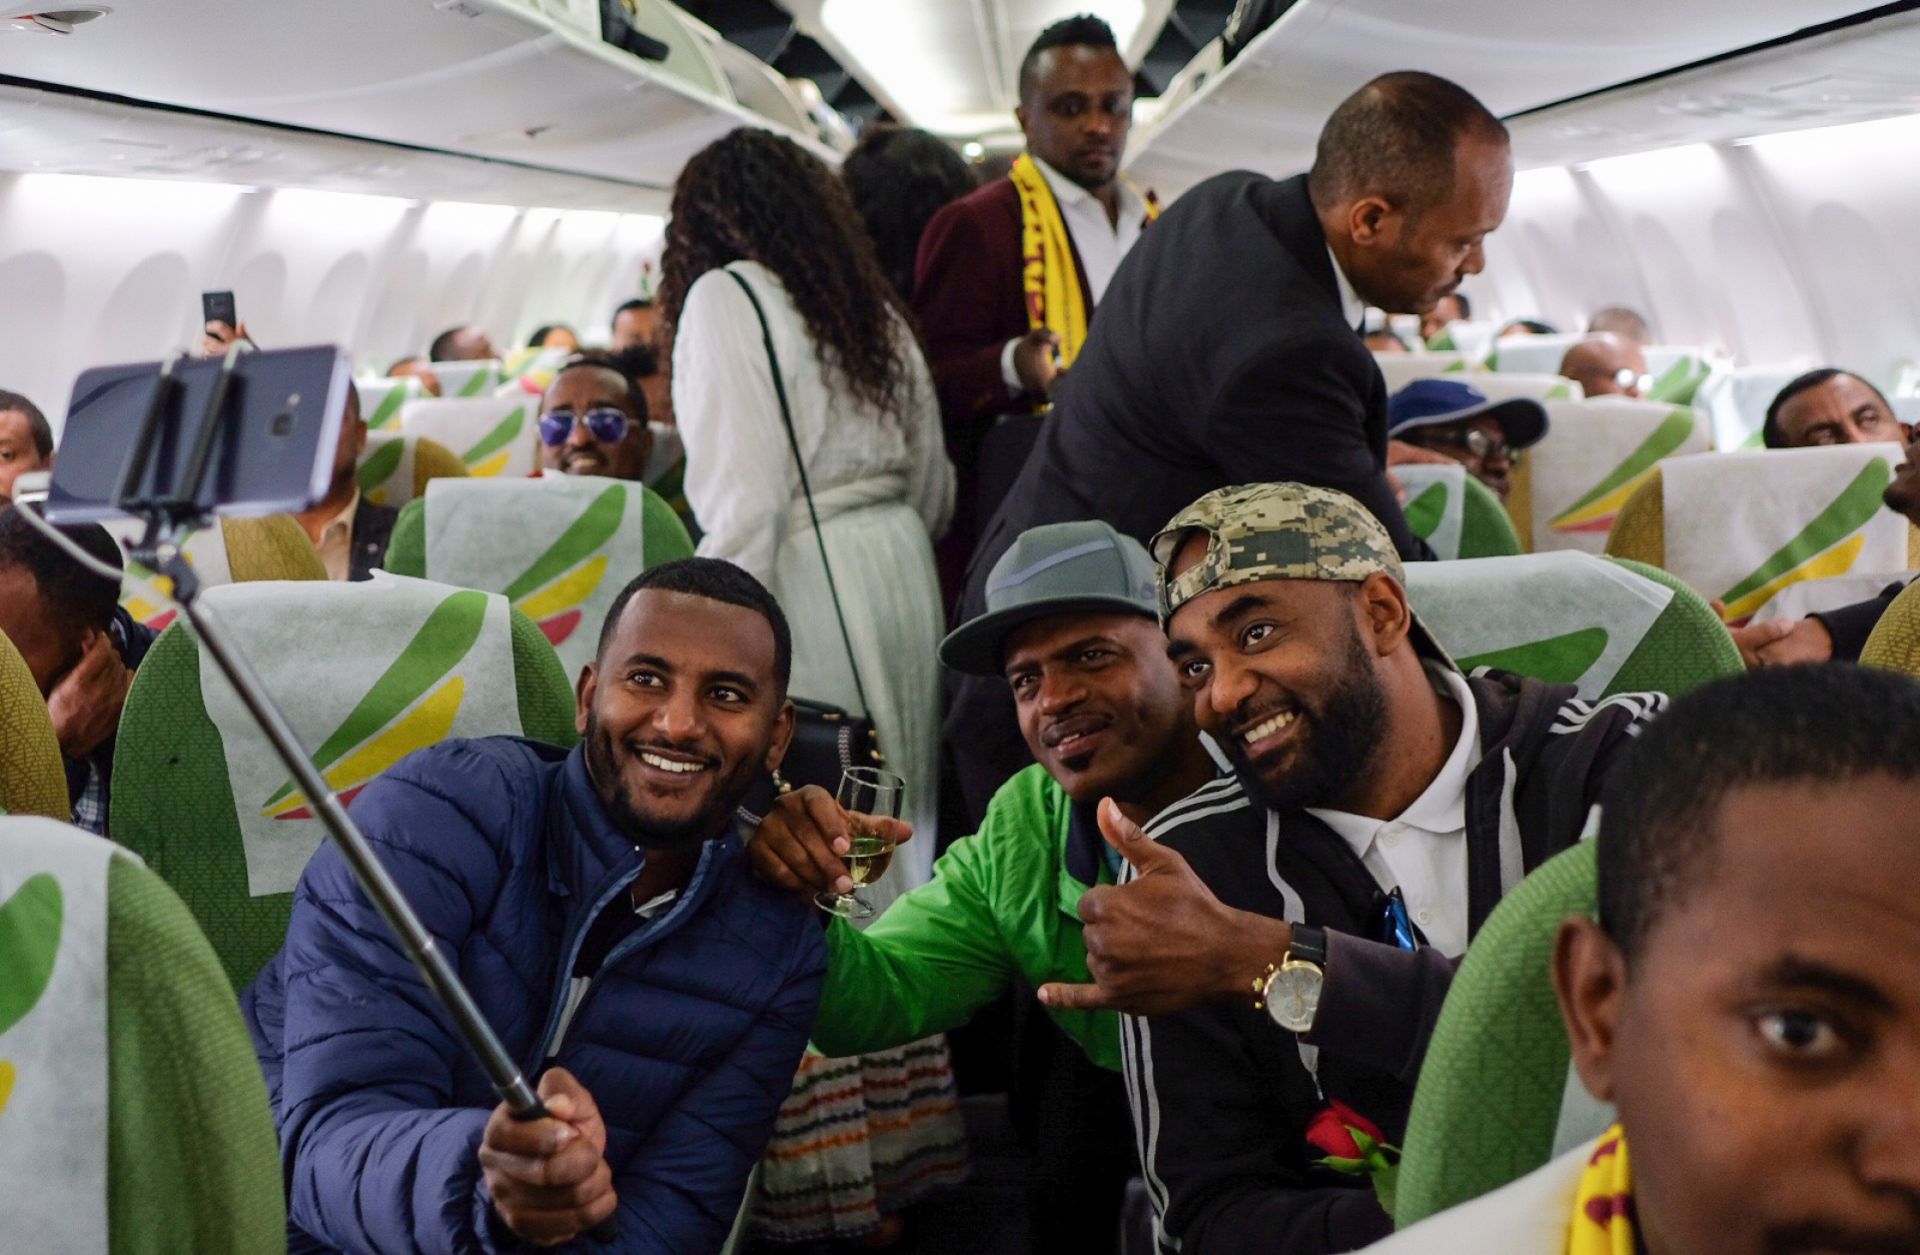 Passengers pose for a selfie inside an Ethiopian Airlines flight on July 18, 2018. The trip was the first commercial flight between the Ethiopian and Eritrean capitals in two decades.